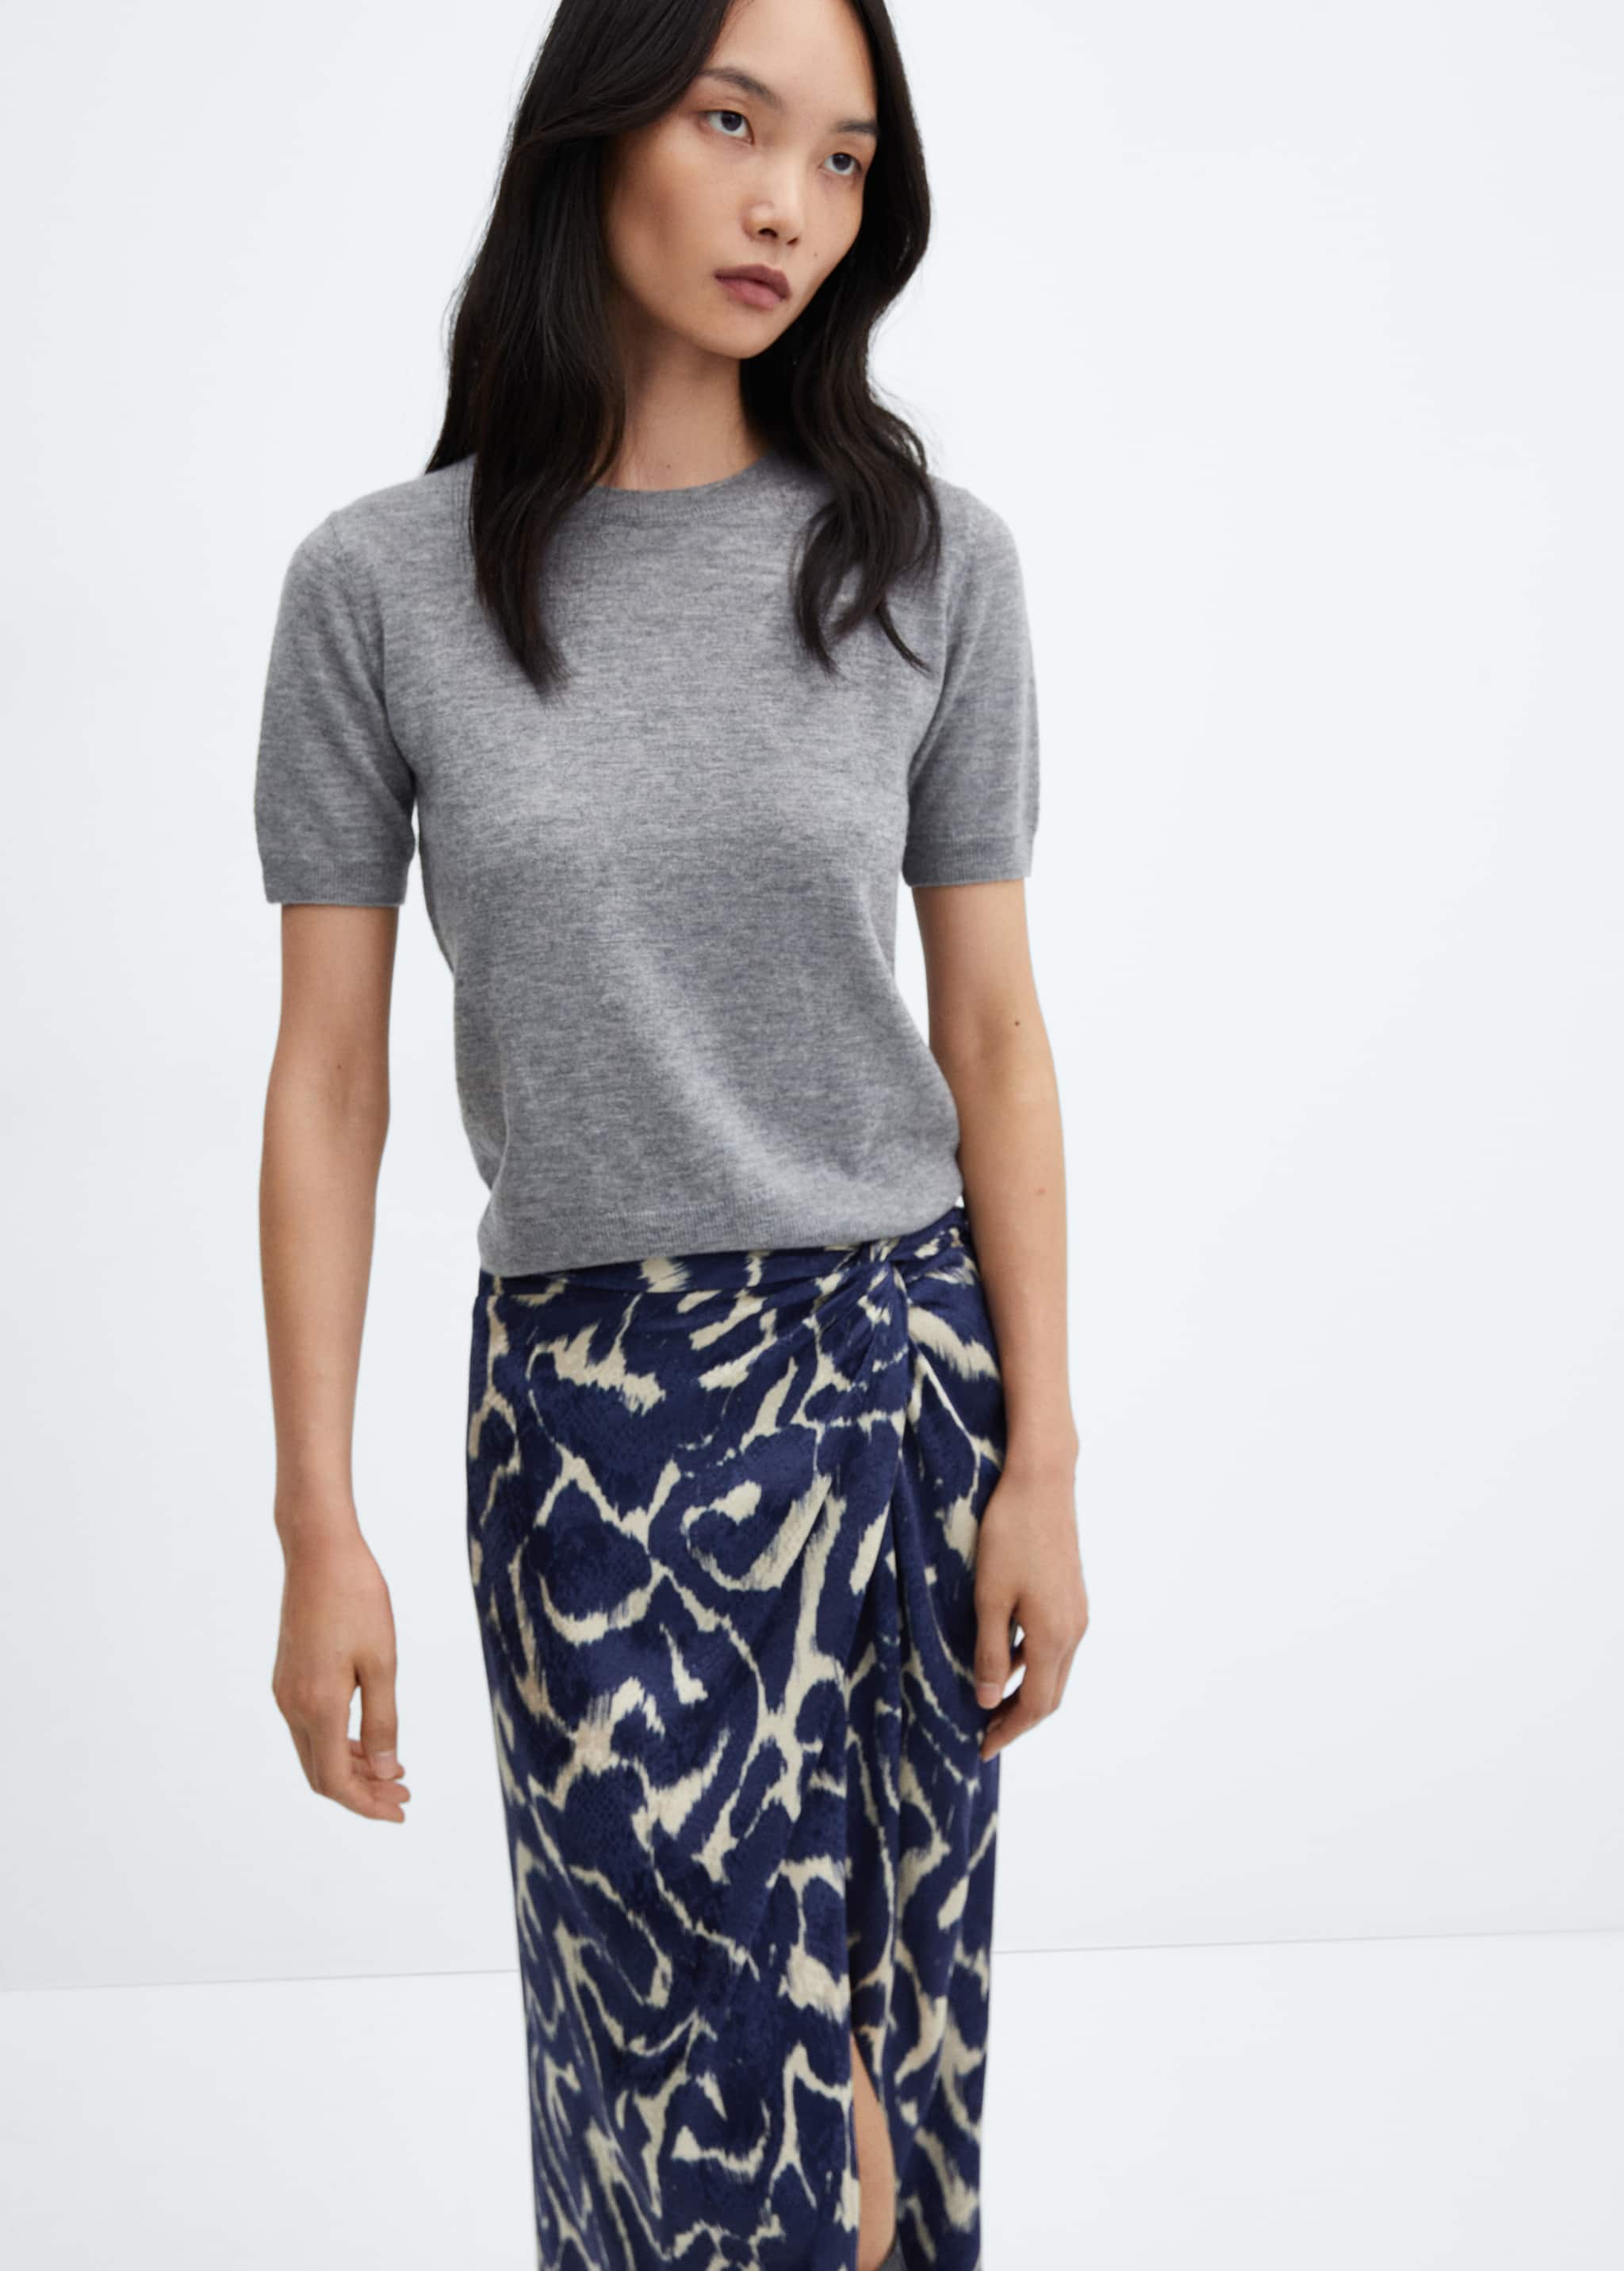 Knot printed skirt - Details of the article 1